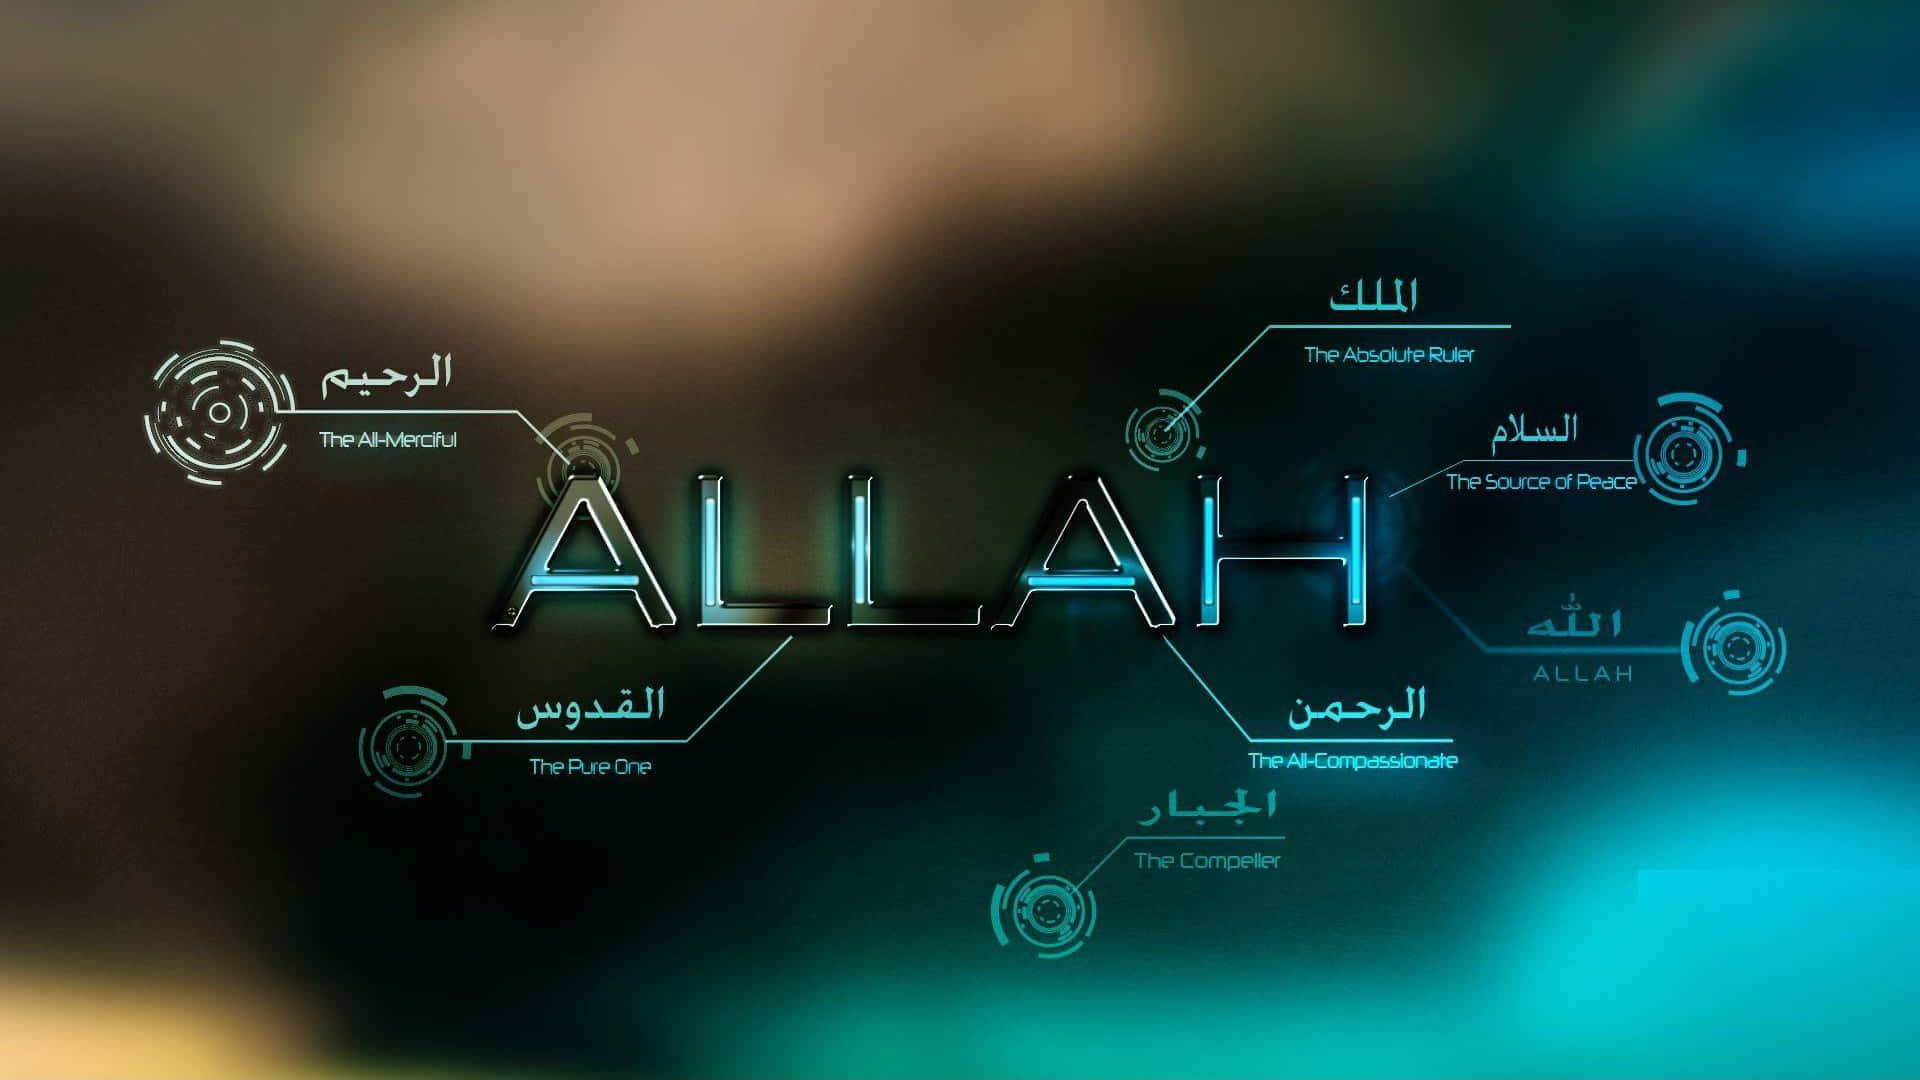 Allah, the One and Only